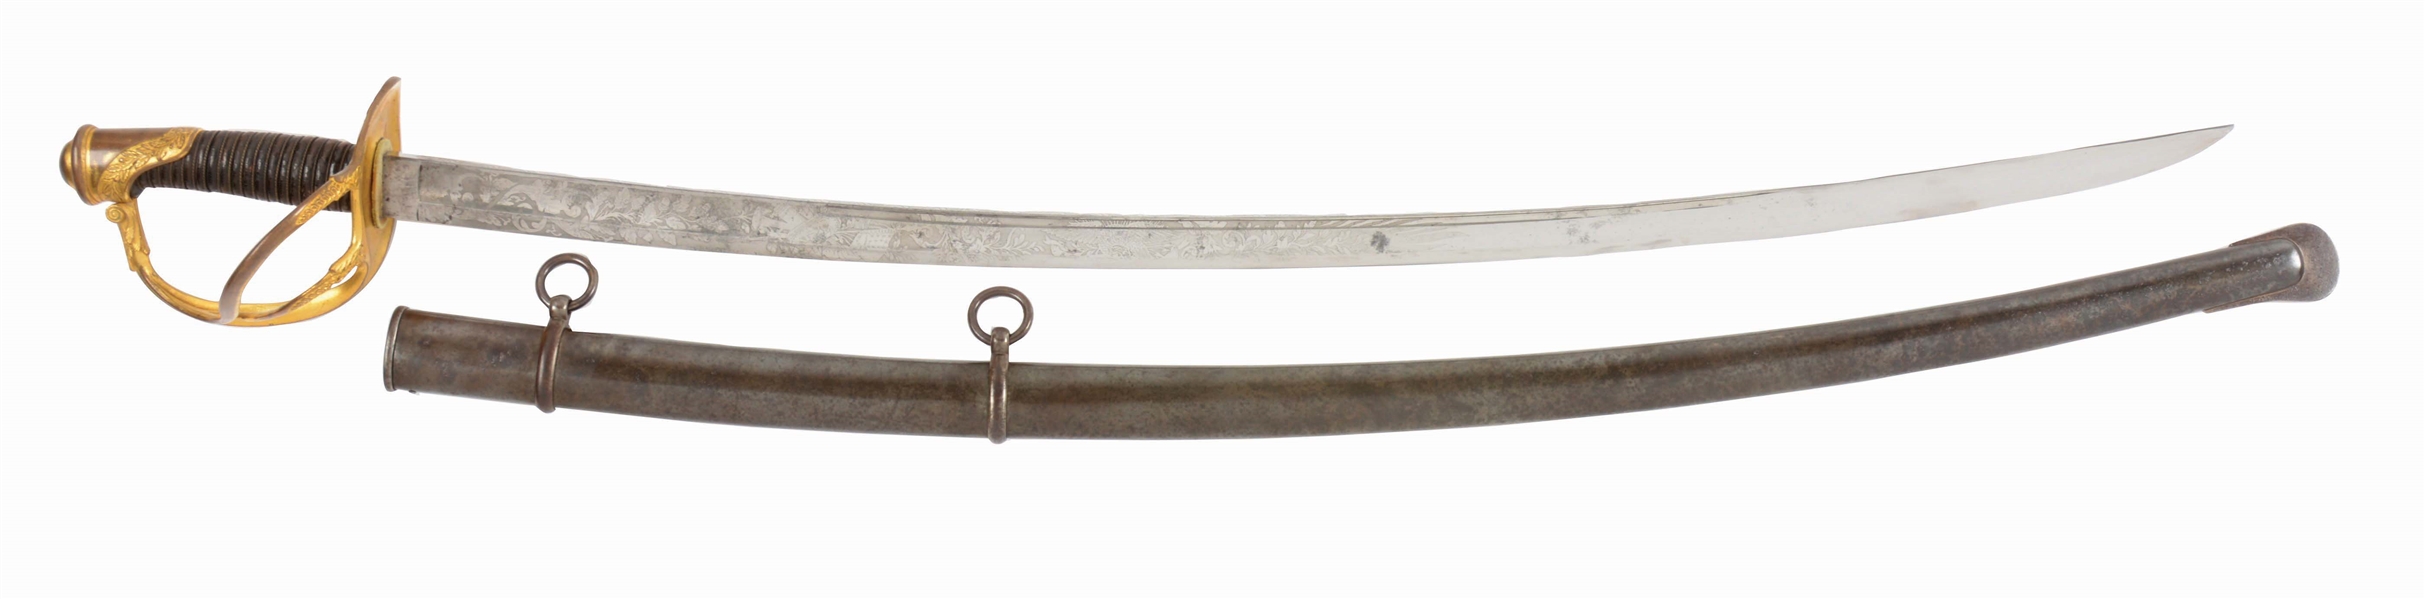 SCARCE U.S. MODEL 1840 CAVALRY OFFICERS SABER BY AMES.